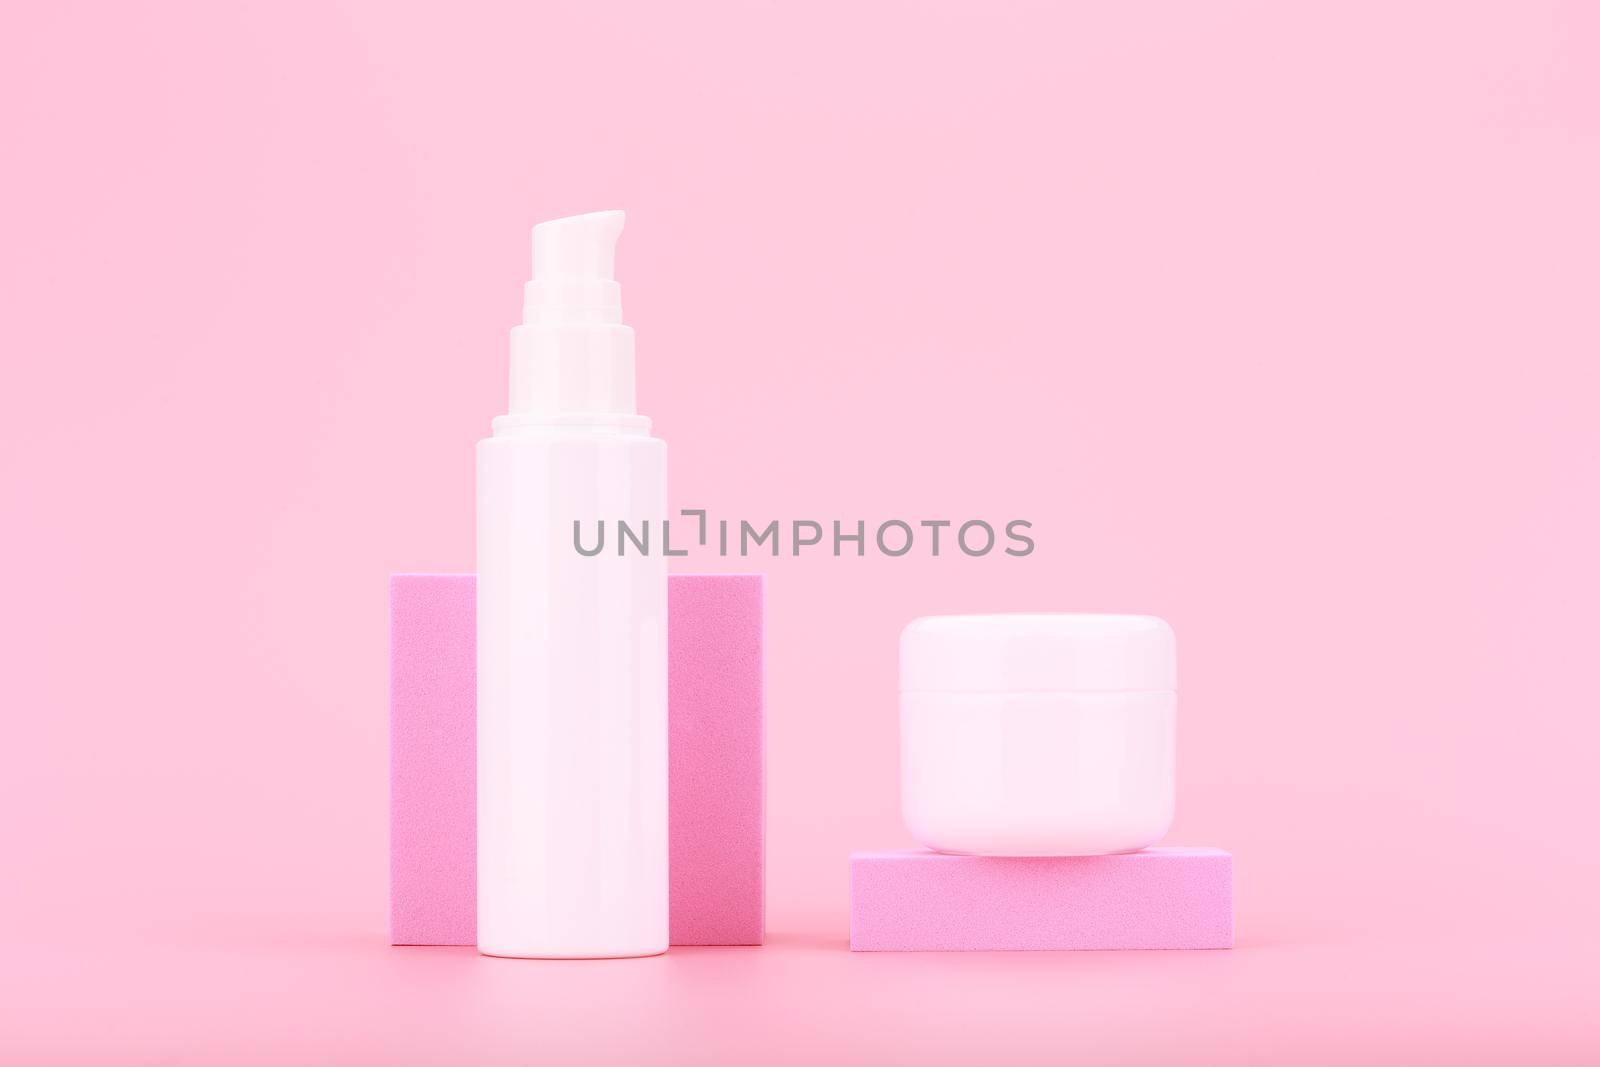 Face cream or lotion and under eye gel or cream against pink background. Concept of daily skin care, moisturizing and hydrating beauty products. 